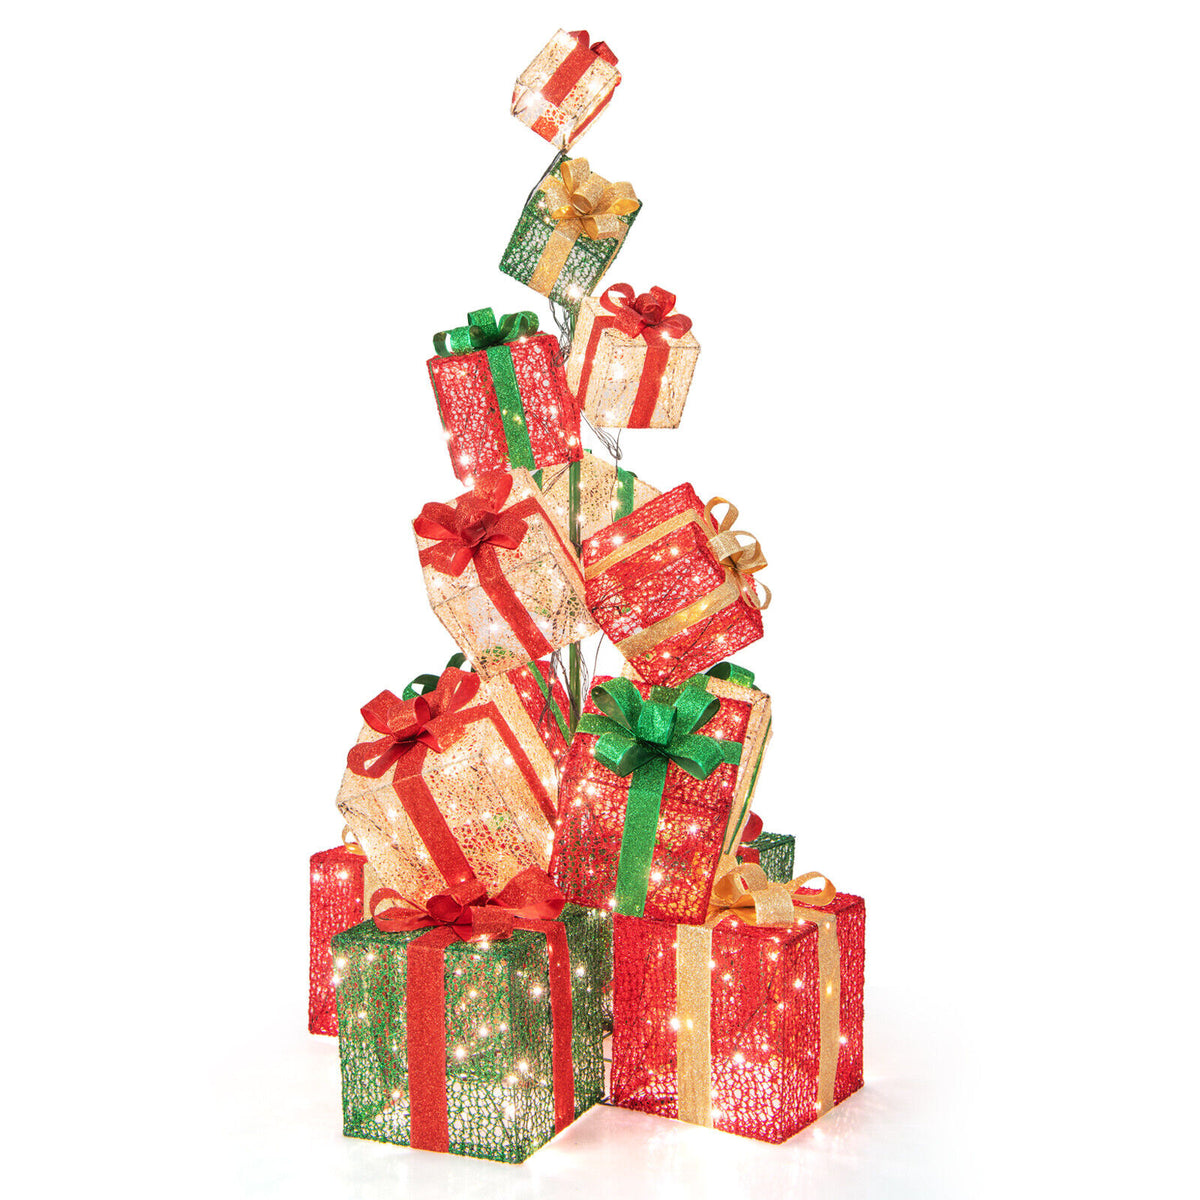 67" Stacked Gift Box Tower Decoration W/ 450 LED Lights For Christmas